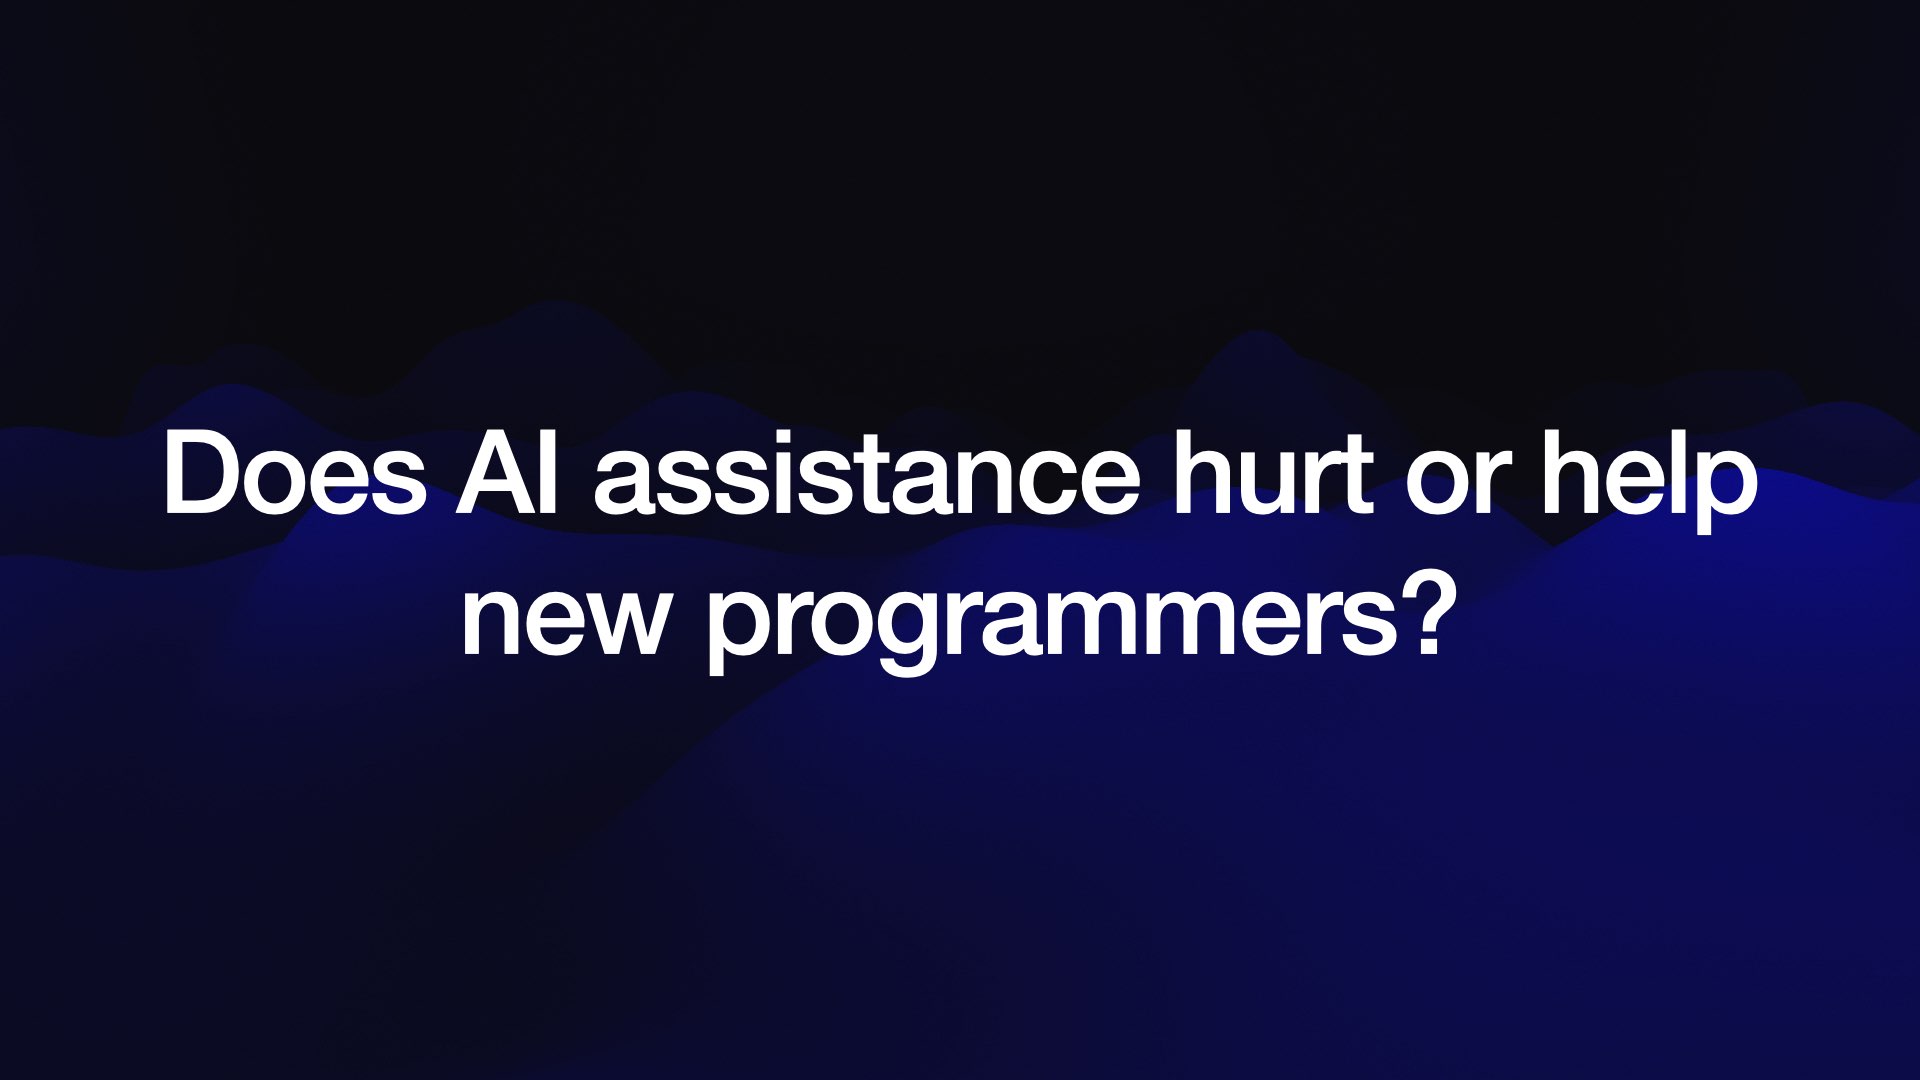 Does Al assistance hurt or help new programmers?